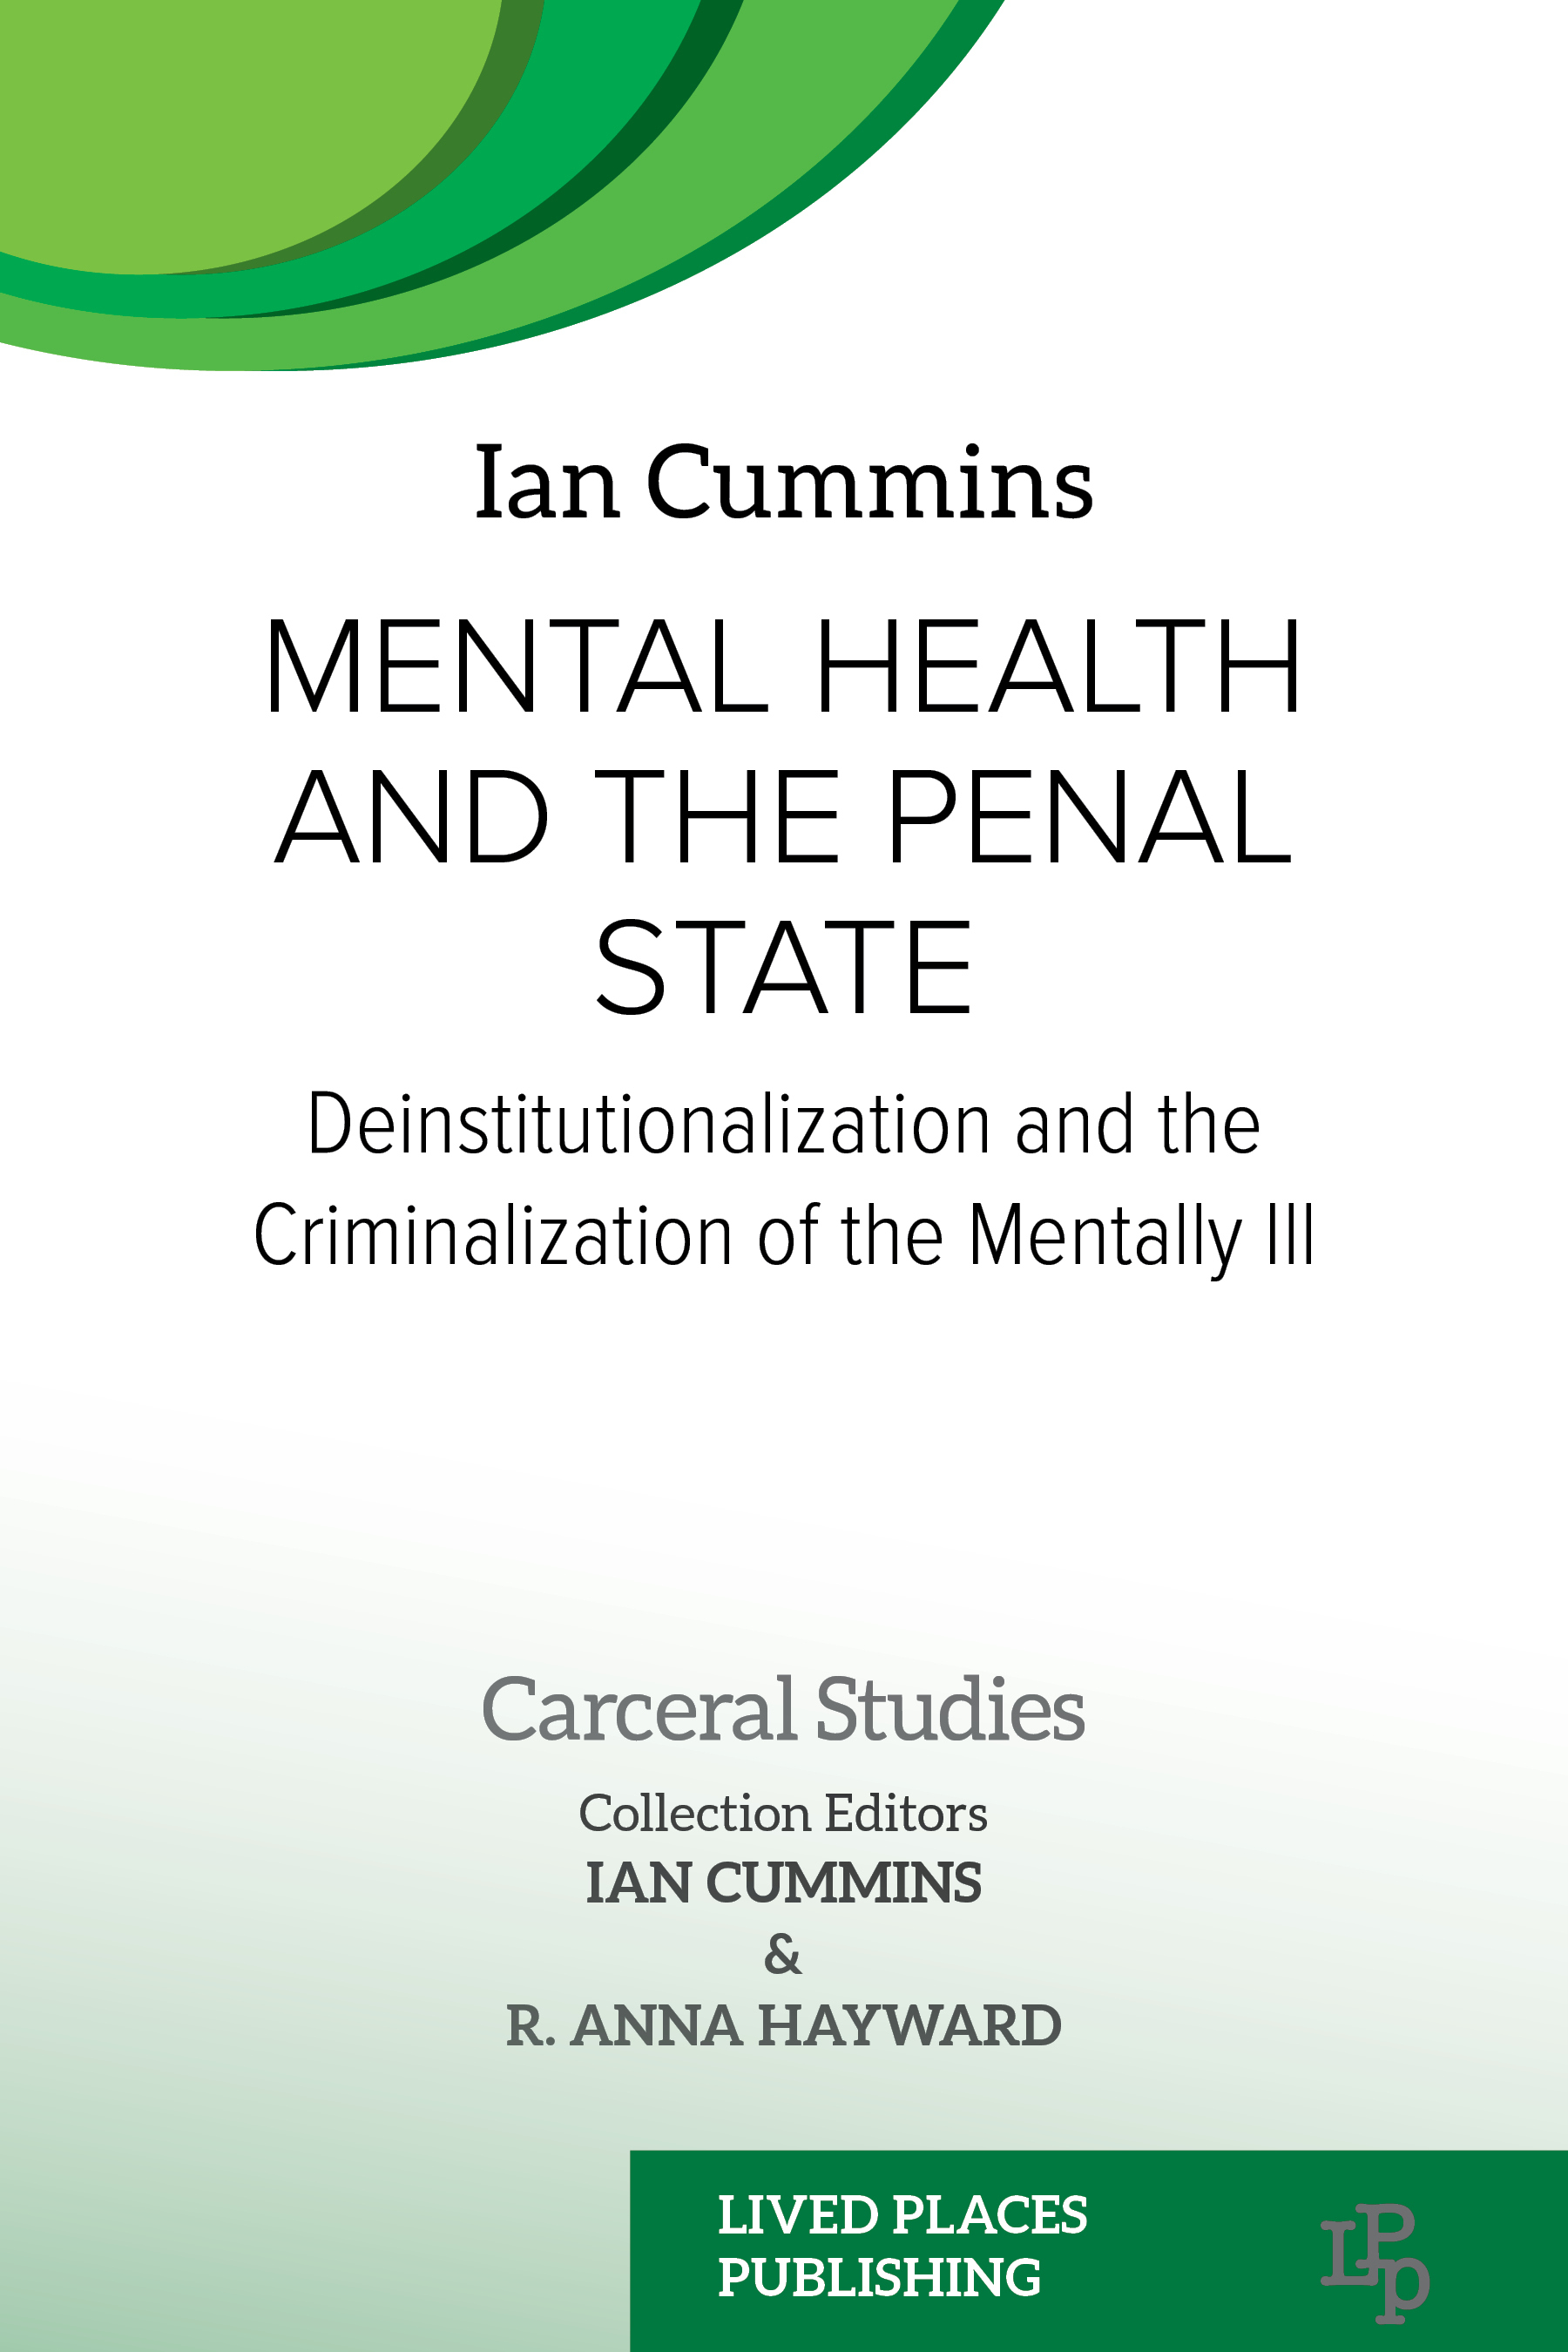 Mental Health and the Penal State